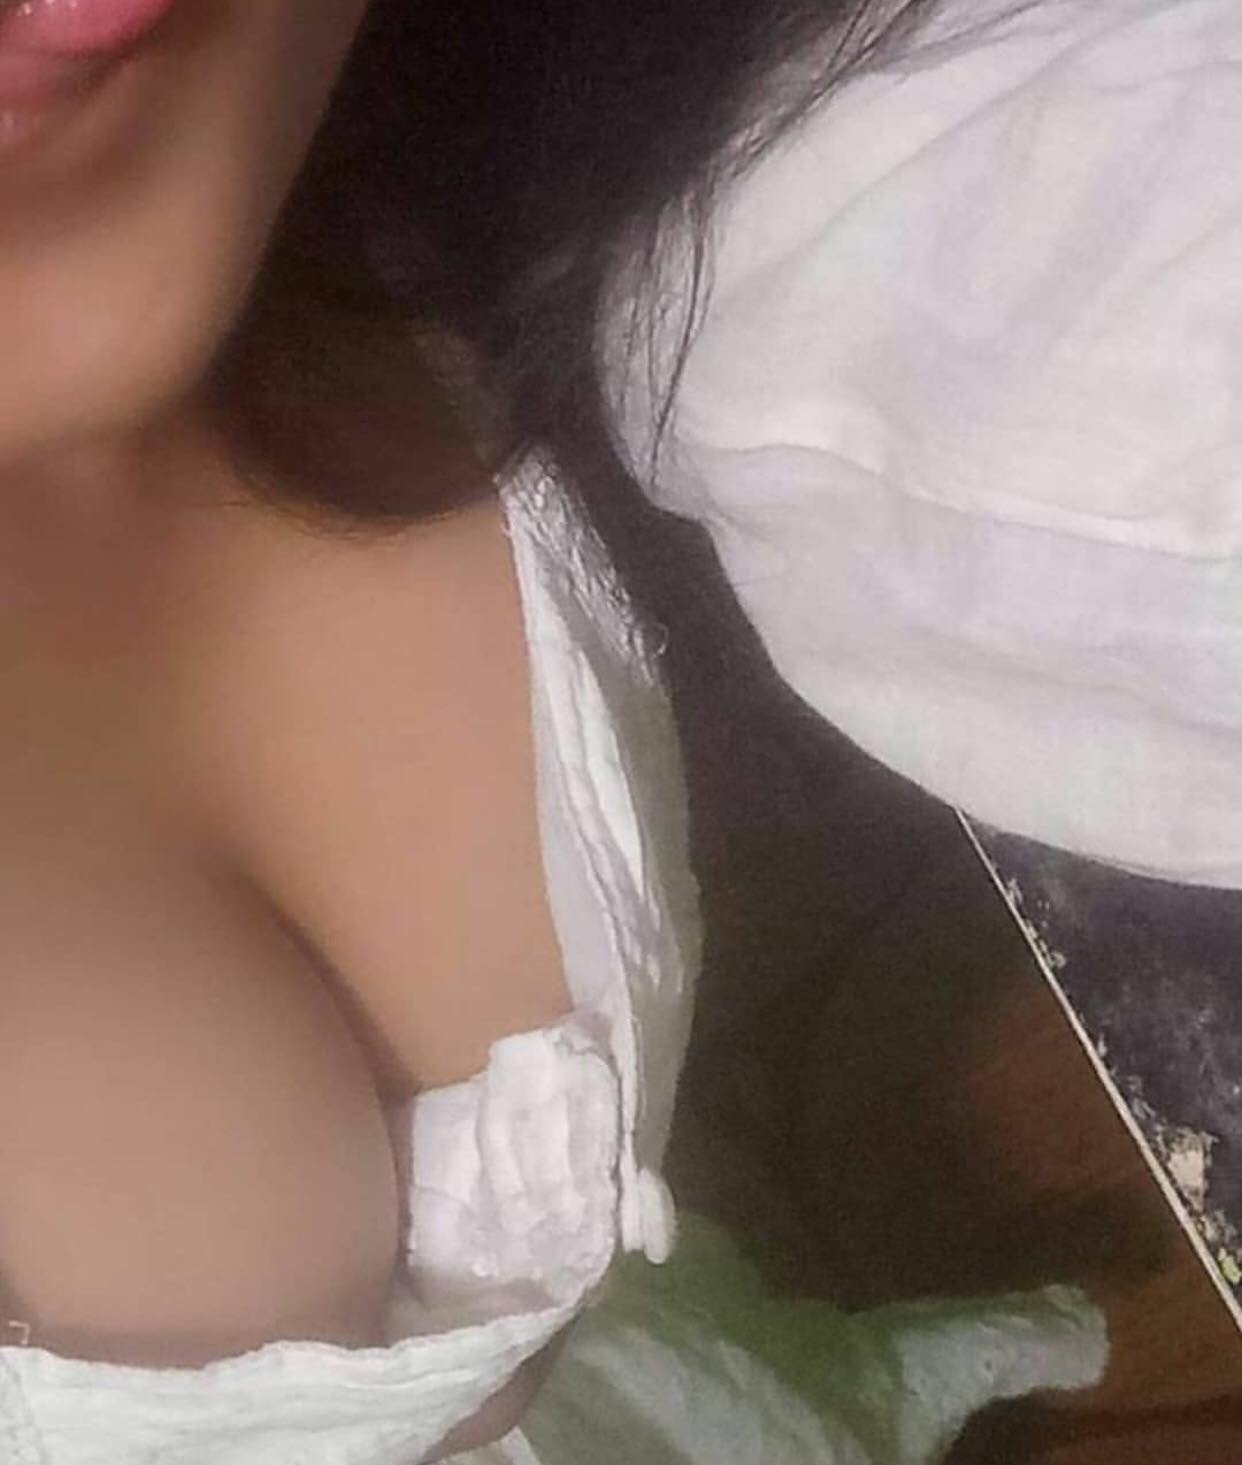 Watch the Photo by Slutty Nancy with the username @Nancy2211, who is a star user, posted on April 15, 2019. The post is about the topic Amateurs. and the text says 'follow and subscribe me on..
https://www.modelhub.com/slutty-nancy
https://www.pornhub.com/model/slutty-nancy'